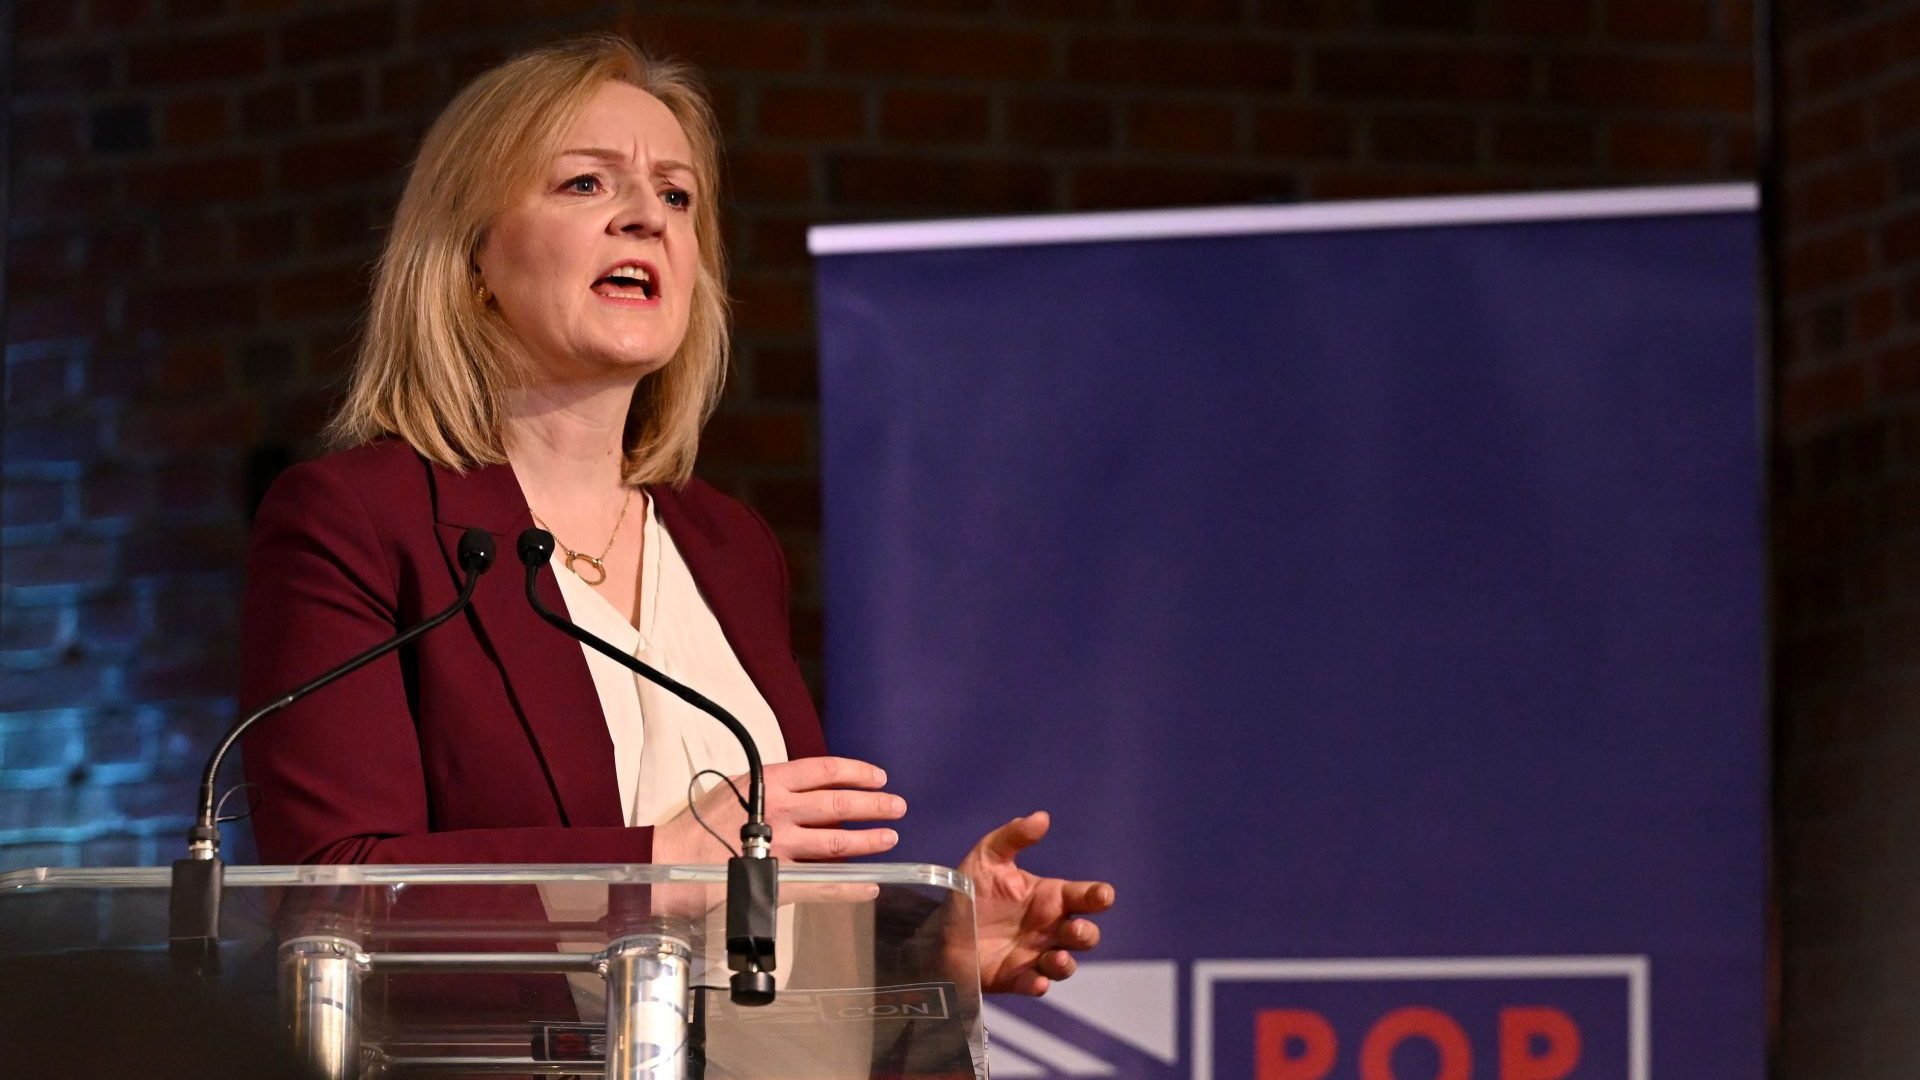 Liz Truss speaks at the launch of the 'Popular Conservatives' movement (Photo by Leon Neal/Getty Images)